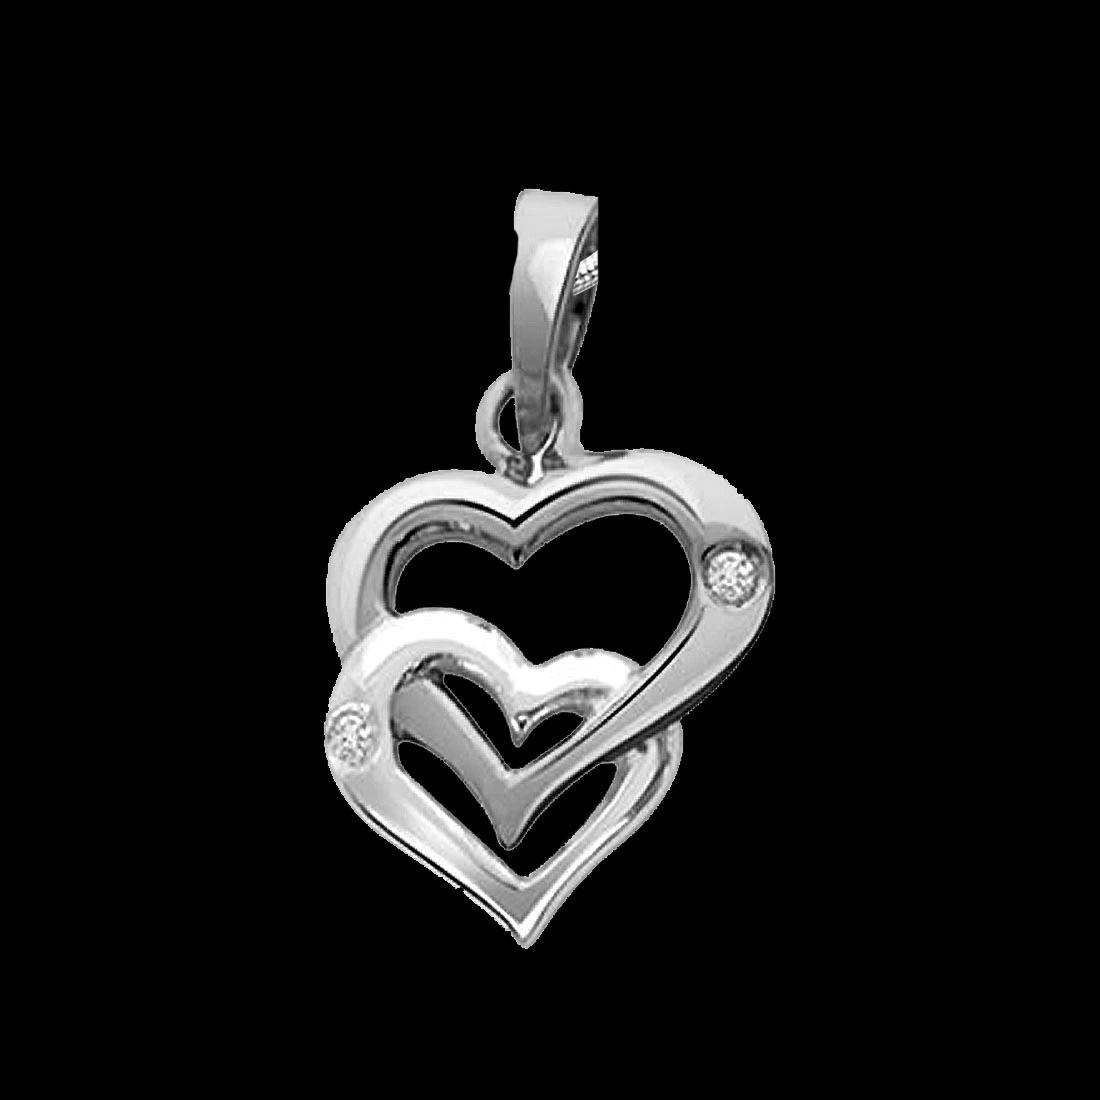 Unique Bonding - Real Diamond & Sterling Silver Pendant with 18 IN Chain (SDP110)